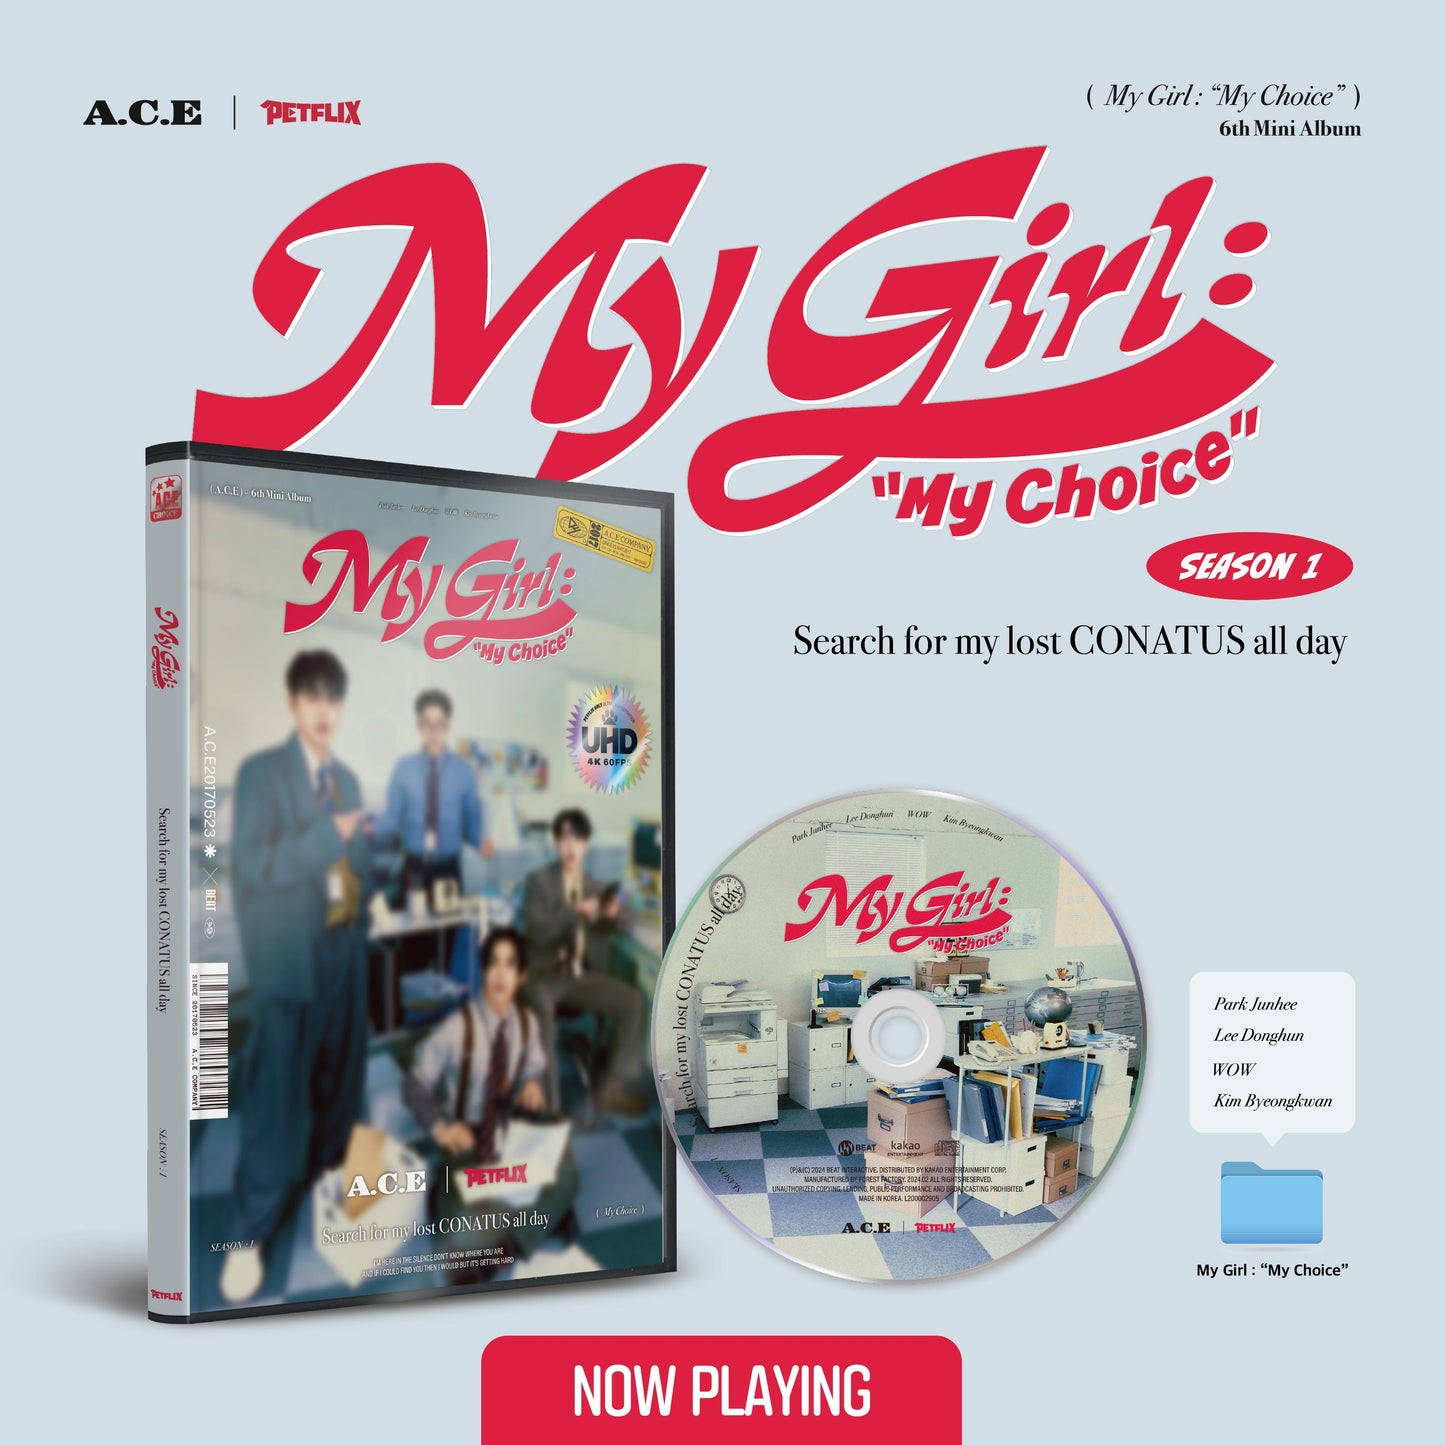 A.C.E - My Girl : "My Choice" (My Girl Season 1 : Search for my lost CONATUS all day)